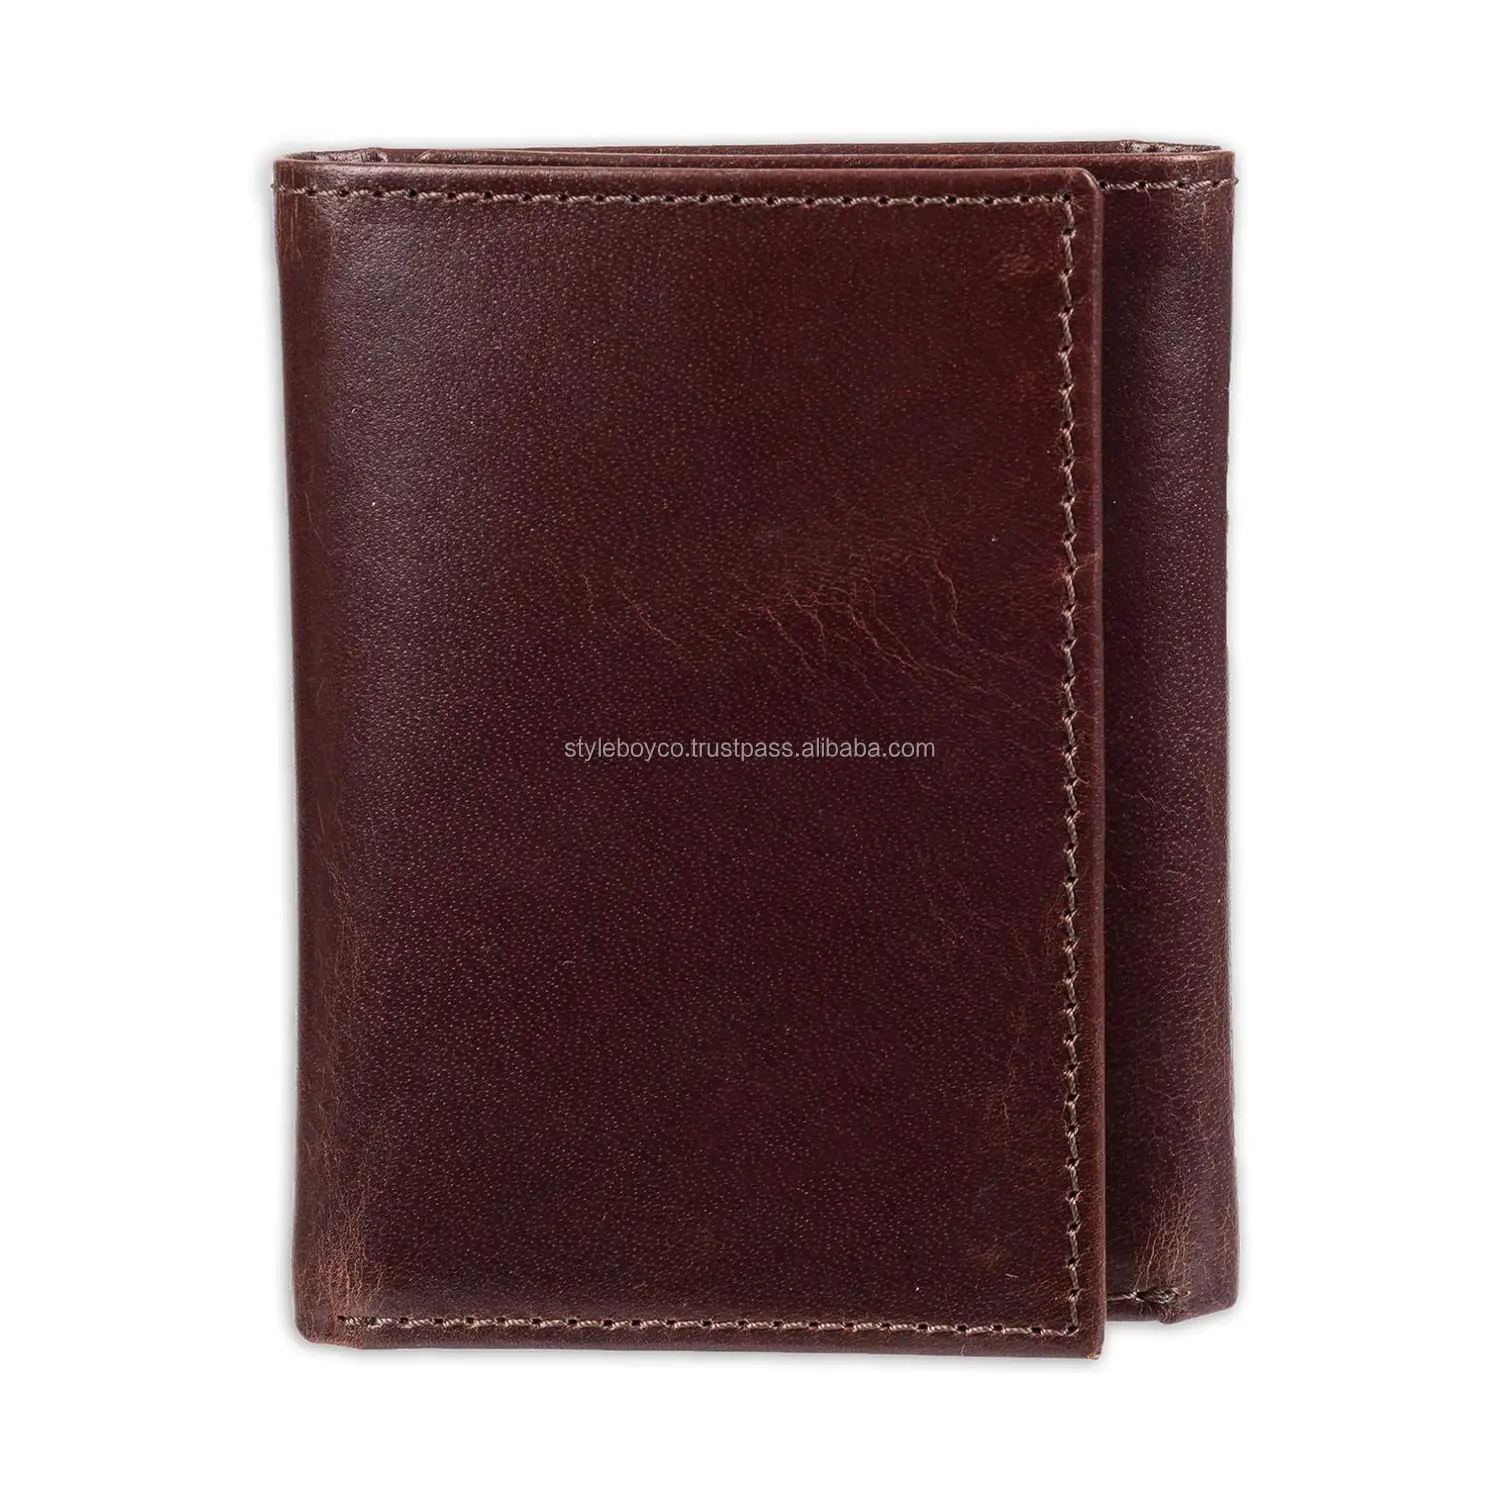 Men's Leather Trifold Wallet With ID Window, Credit Card Slots, Bill Compartment, Extra Storage, and Gift Box Packaging.